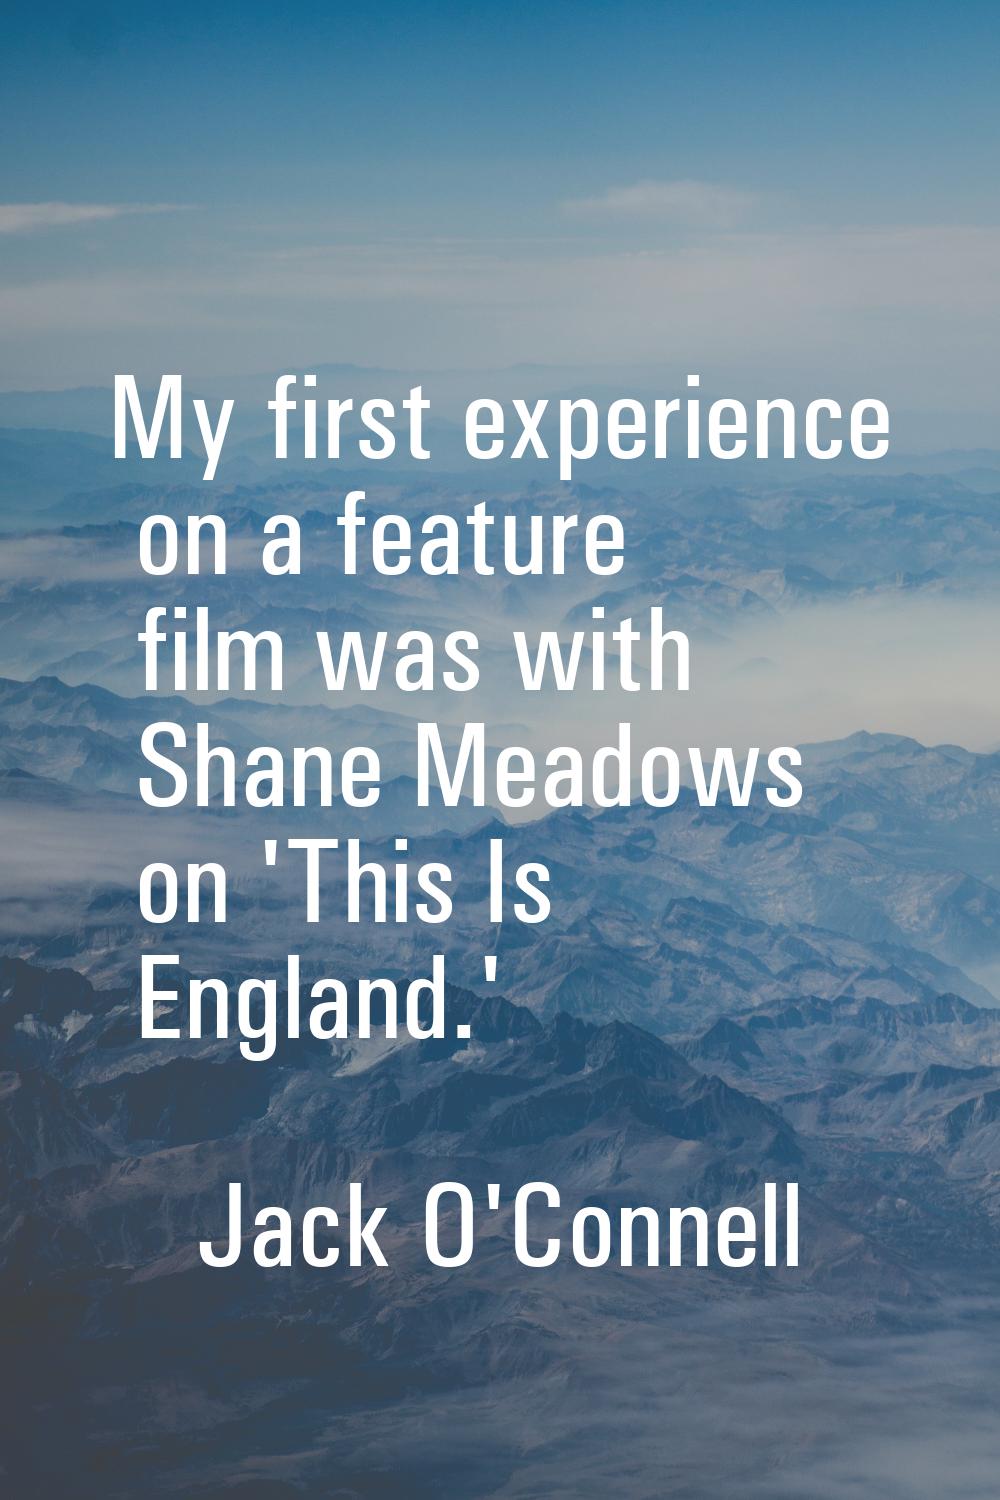 My first experience on a feature film was with Shane Meadows on 'This Is England.'